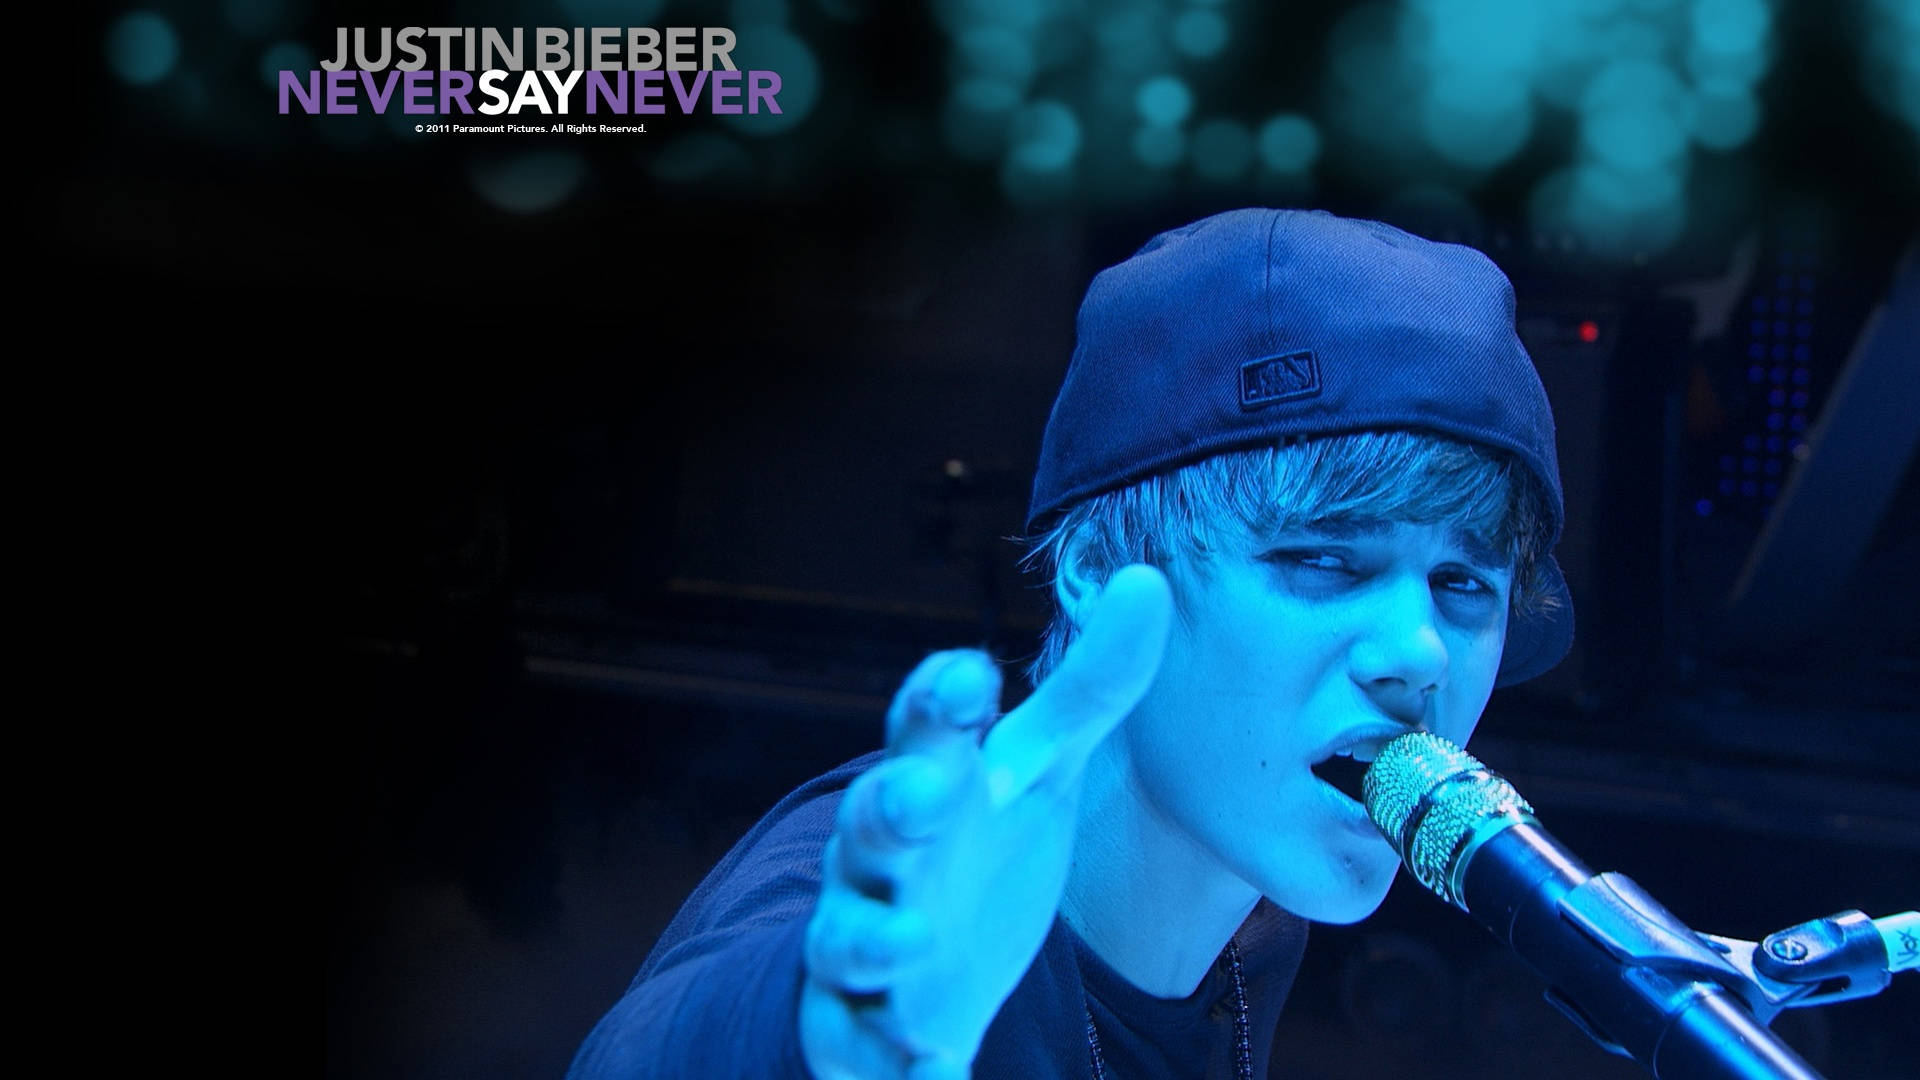 Justin Bieber Performing on Stage Wallpaper